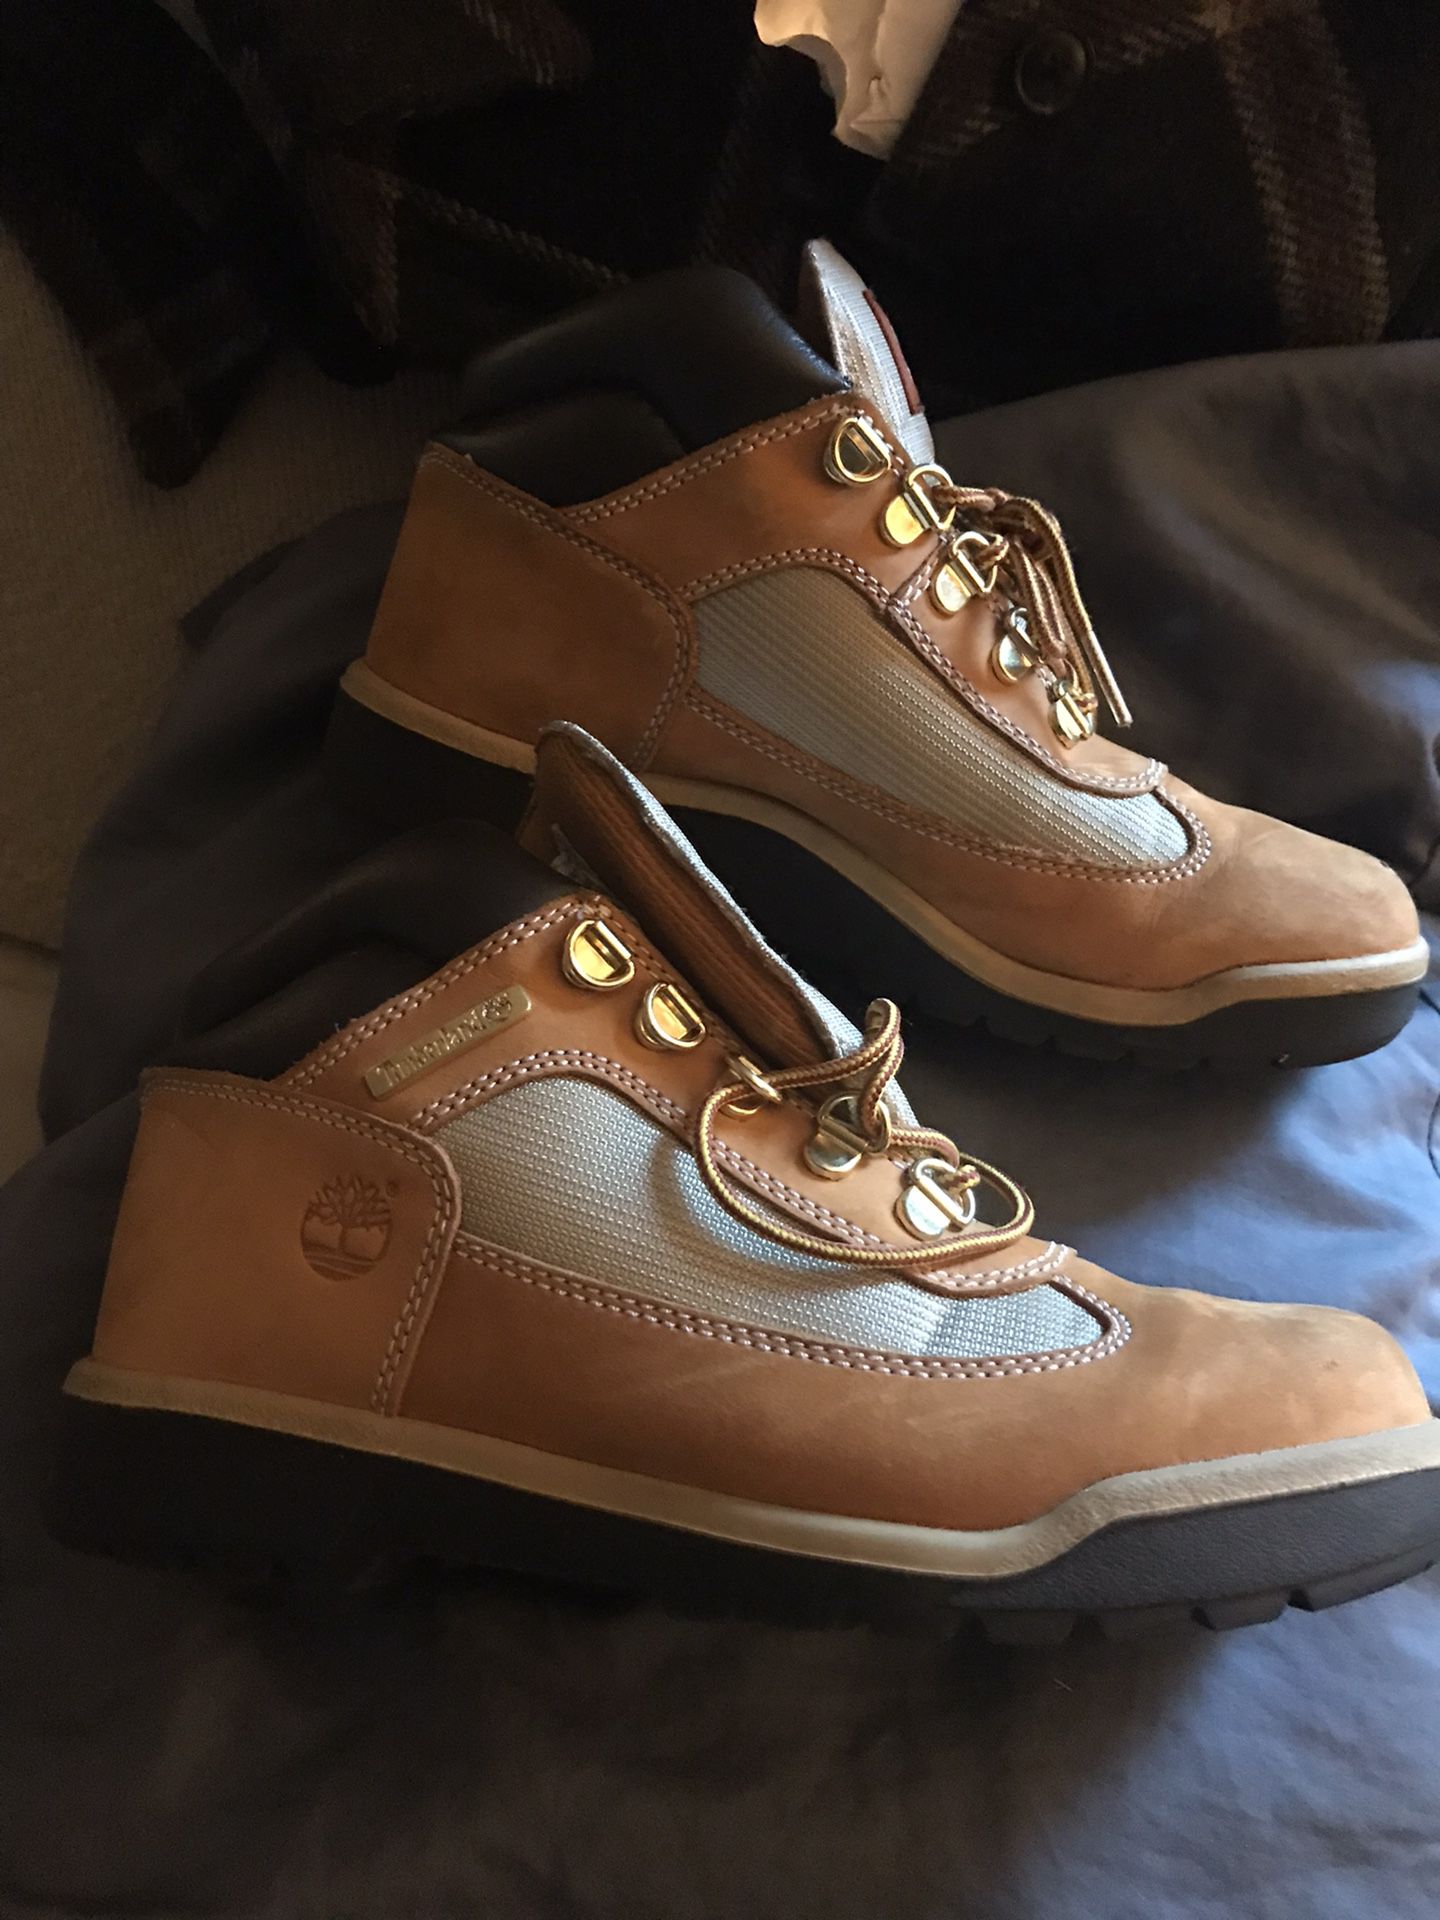 Brand New Timberland Boots Size 4 1/2 Only $40 Firm